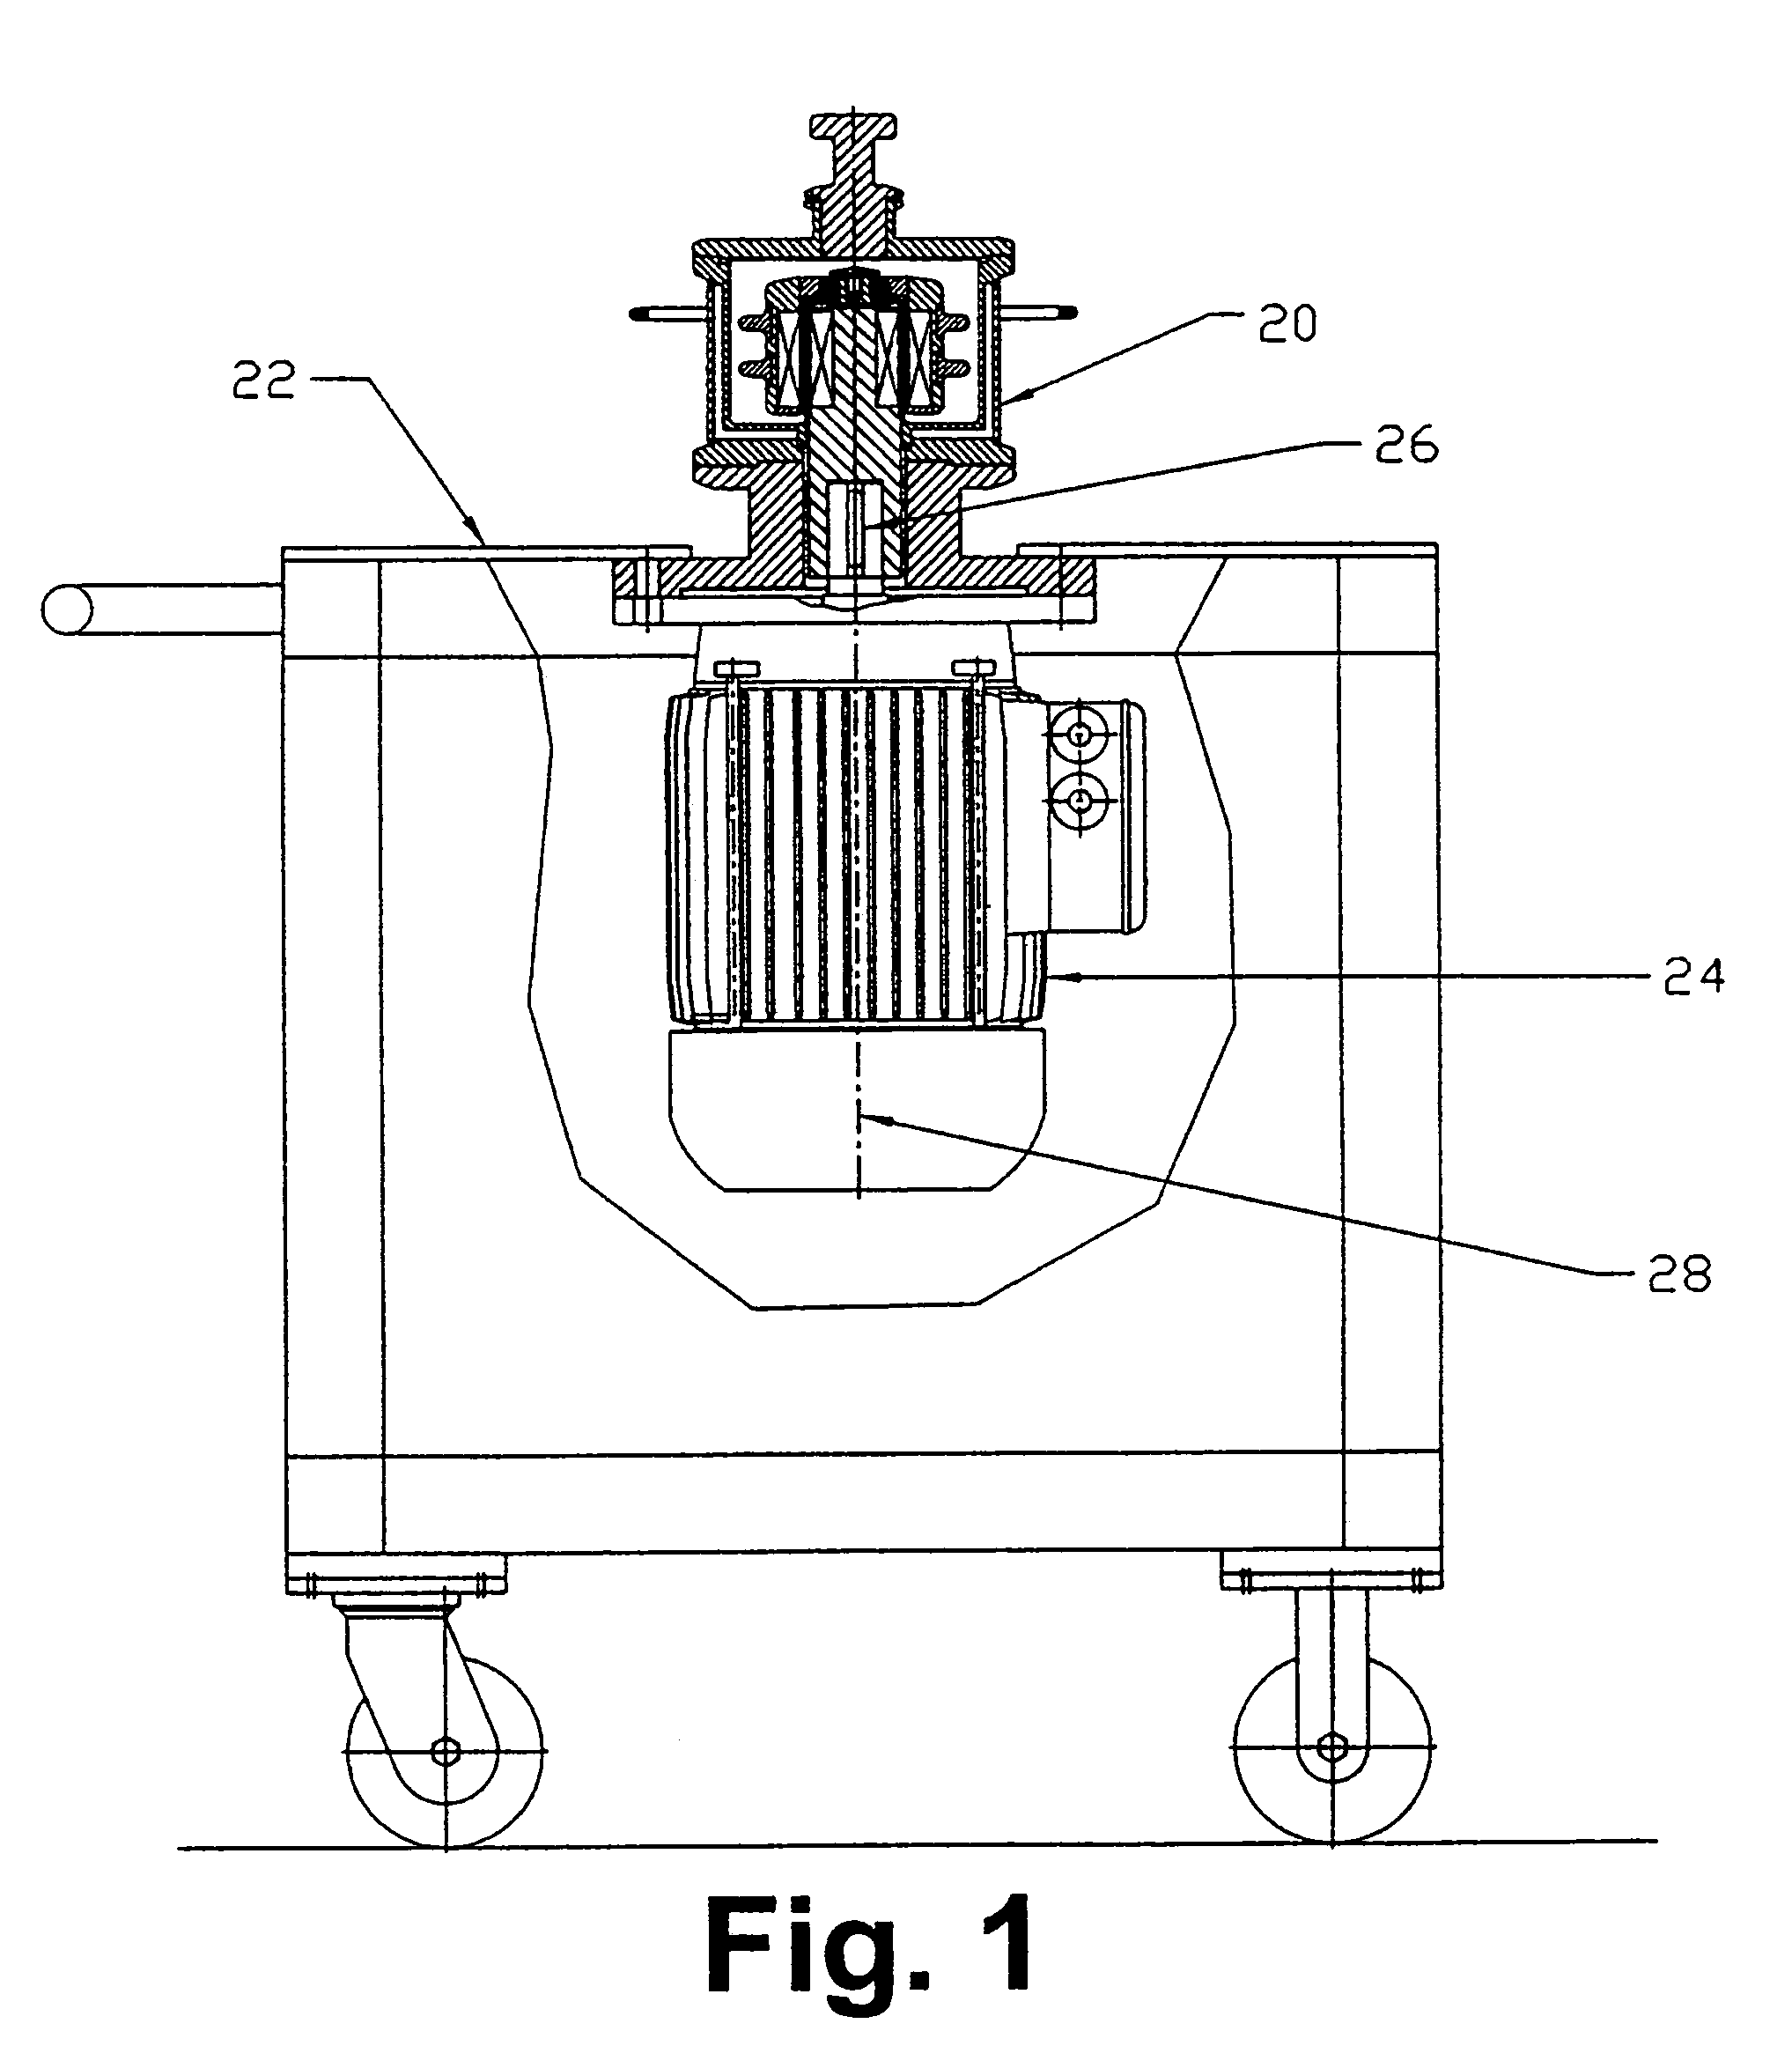 System and method for milling materials